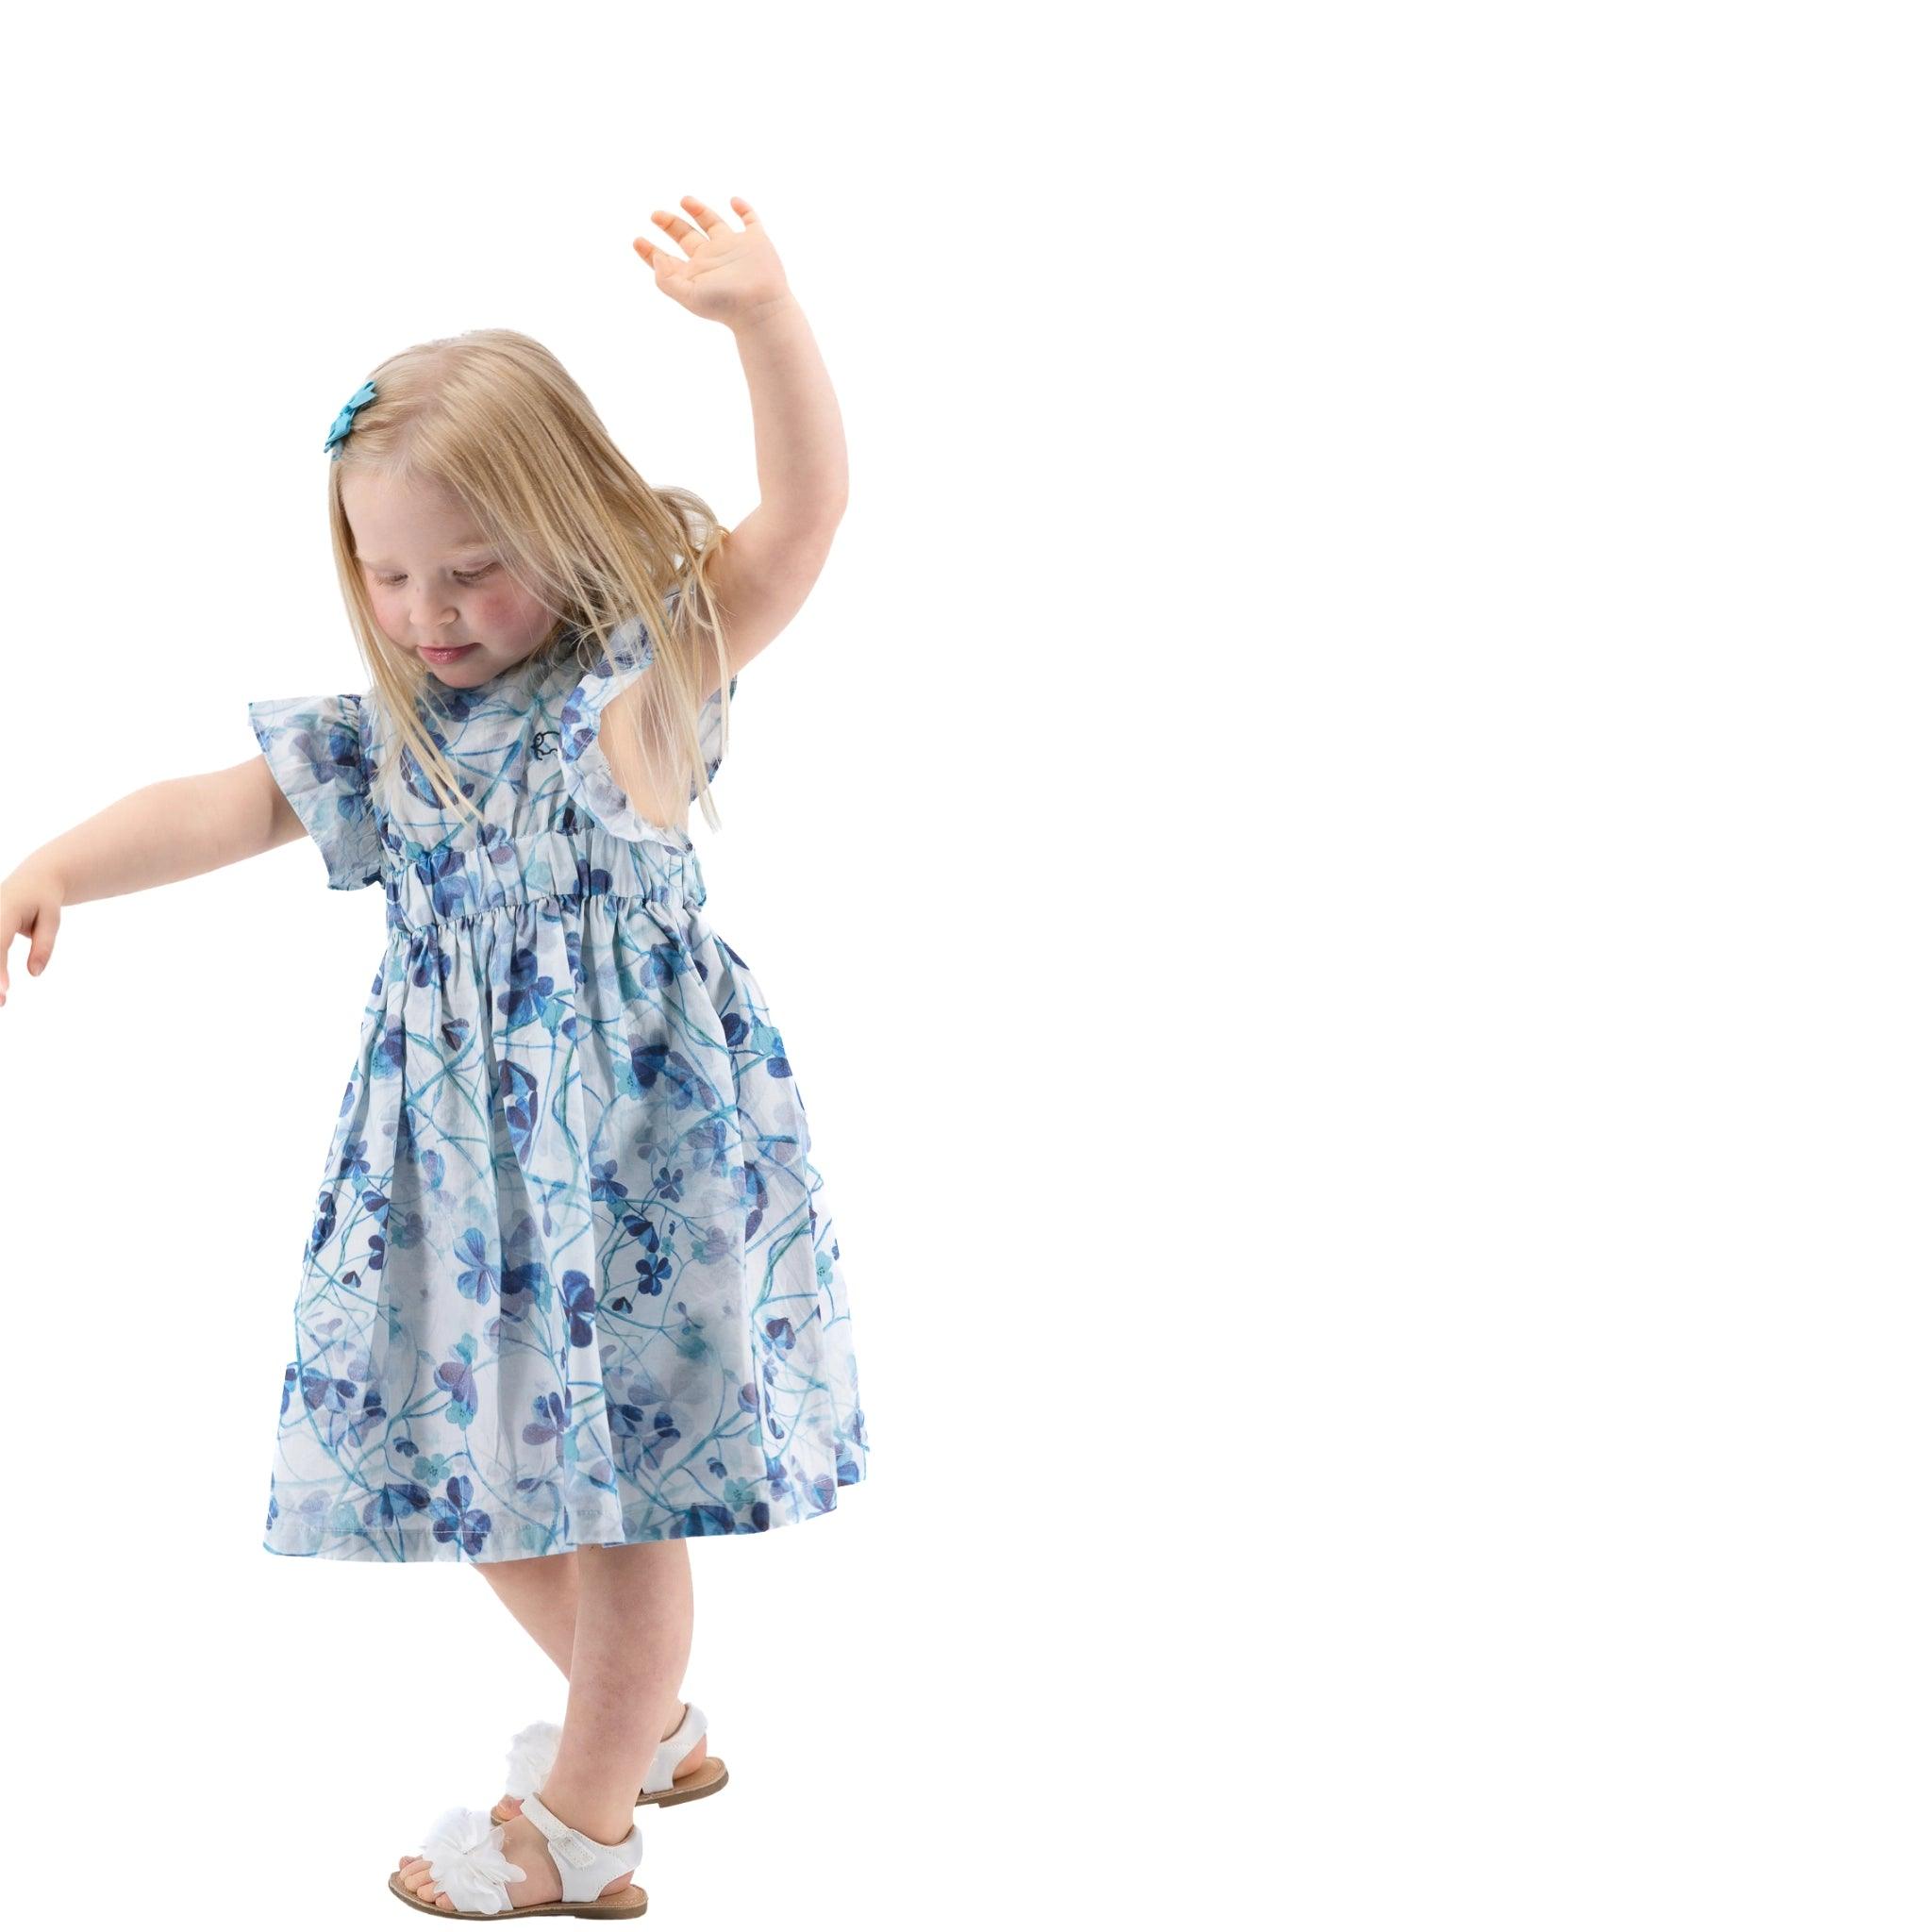 A young girl in a Karee Blue Cotton Floral Dress for Girls and sandals raises her hand while dancing, set against a white background.